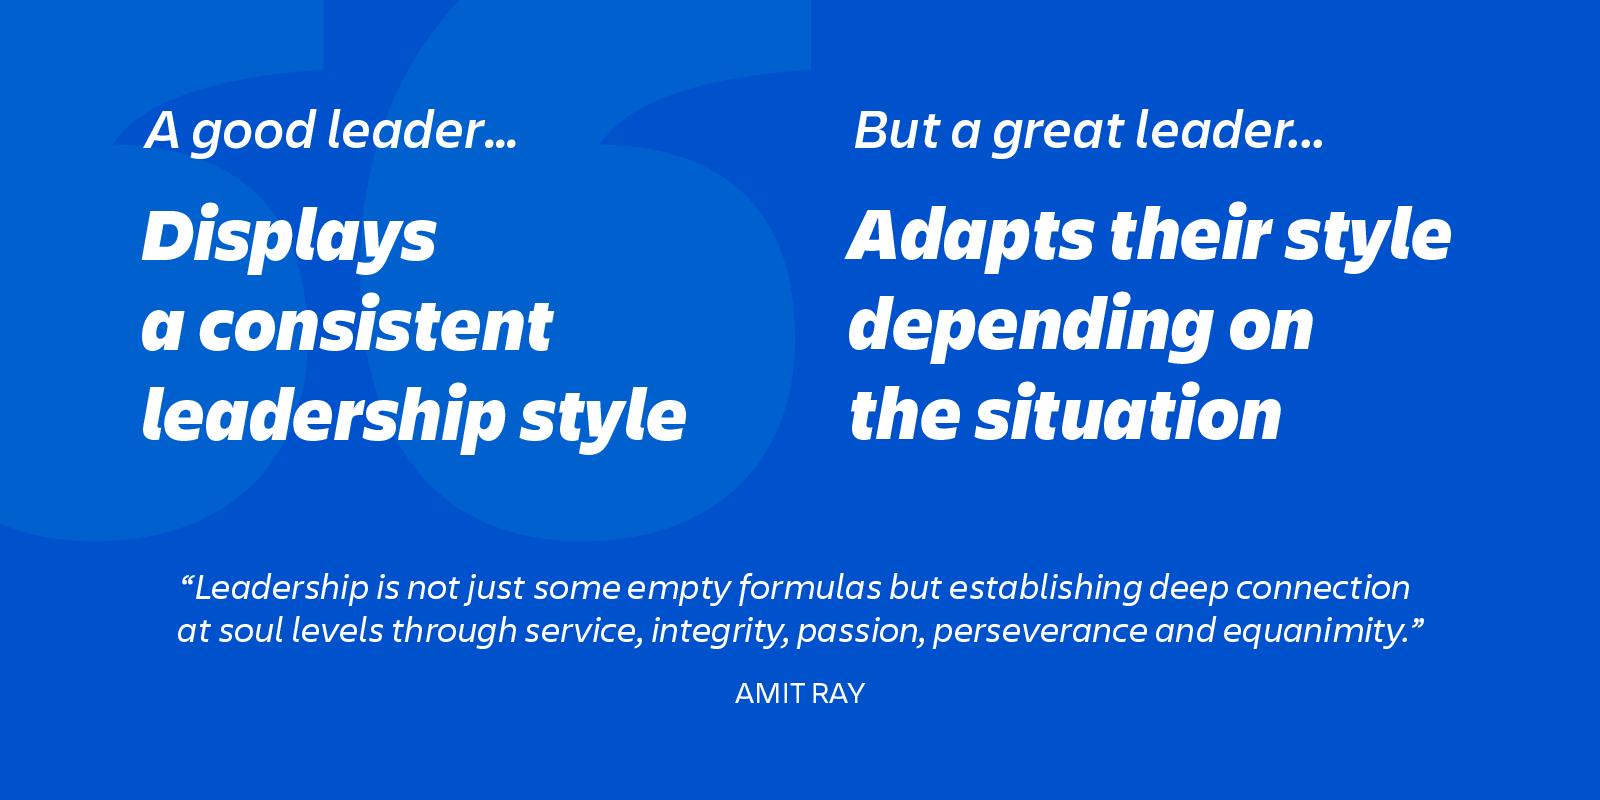 great leaders adapt their style as needed